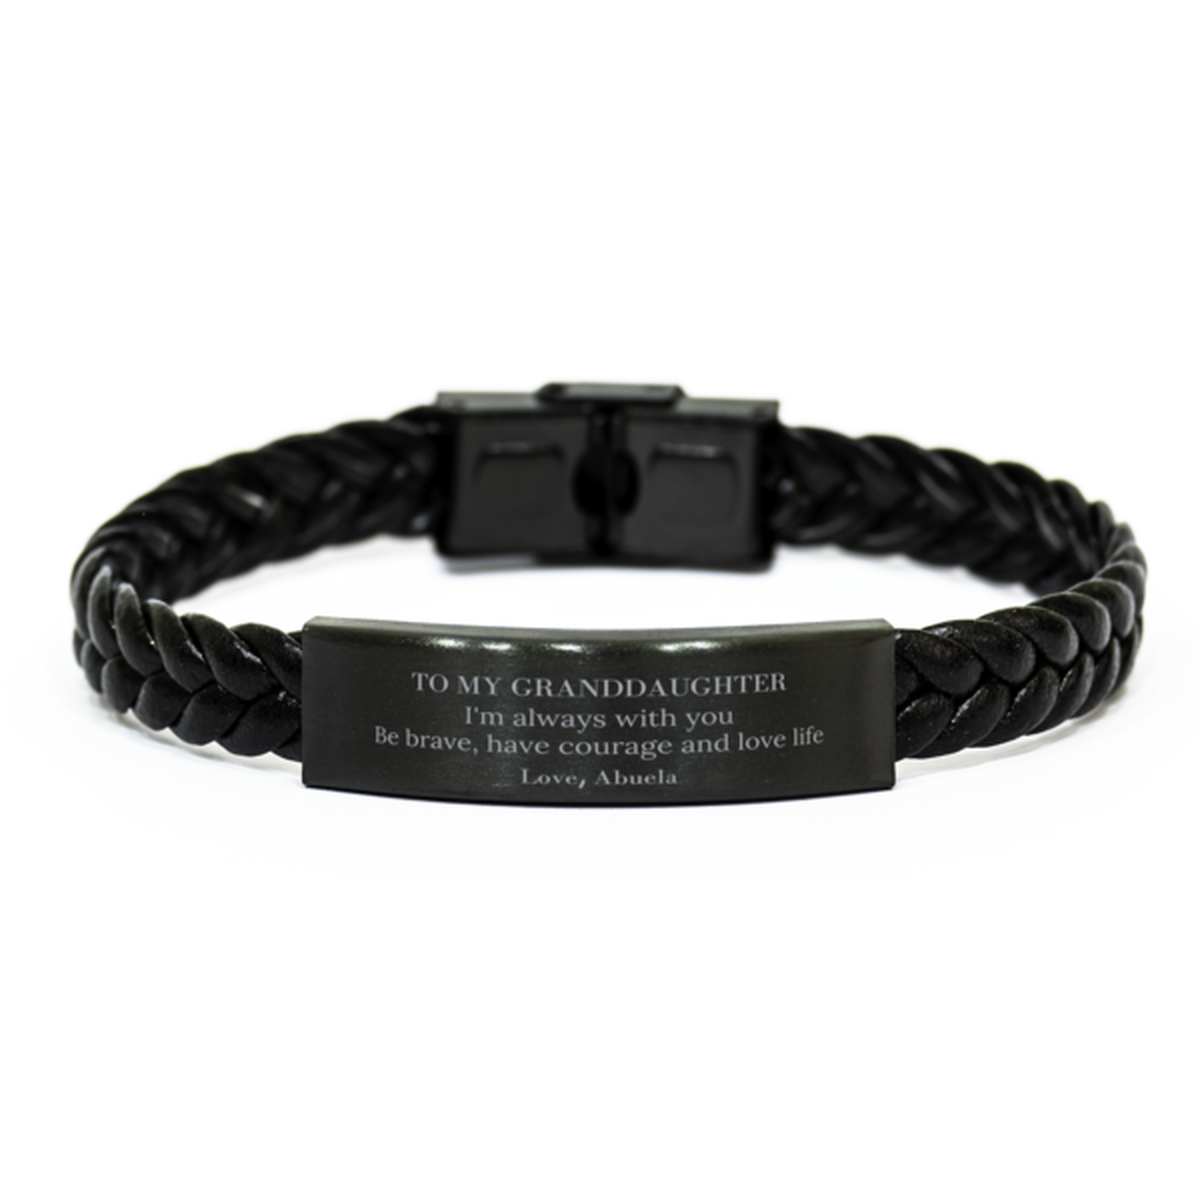 To My Granddaughter Gifts from Abuela, Unique Braided Leather Bracelet Inspirational Christmas Birthday Graduation Gifts for Granddaughter I'm always with you. Be brave, have courage and love life. Love, Abuela